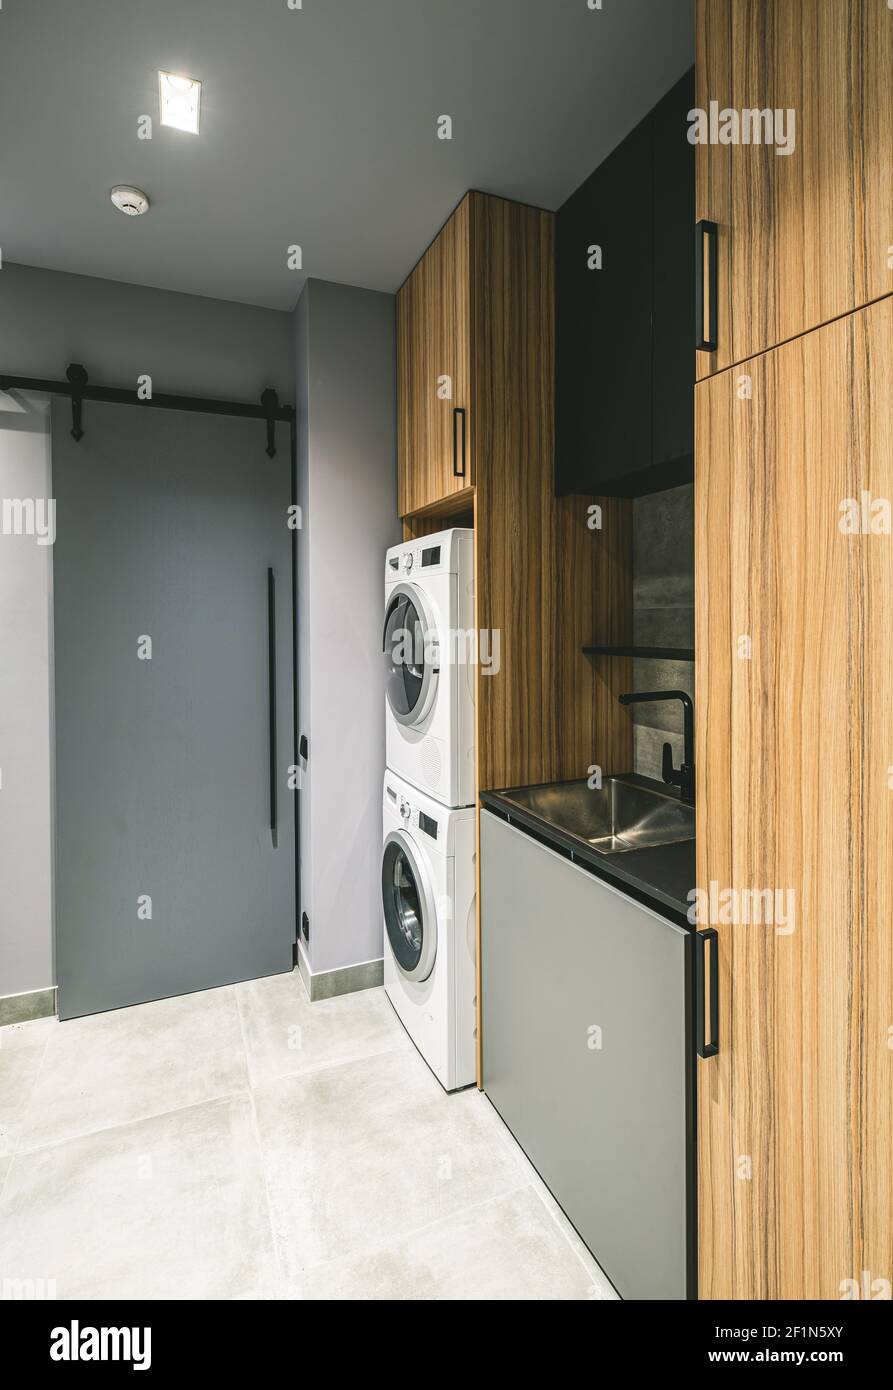 Modern interior of empty laundry room in luxury private house. Grey tones. Wooden cabinets. Washing machine. Stock Photo